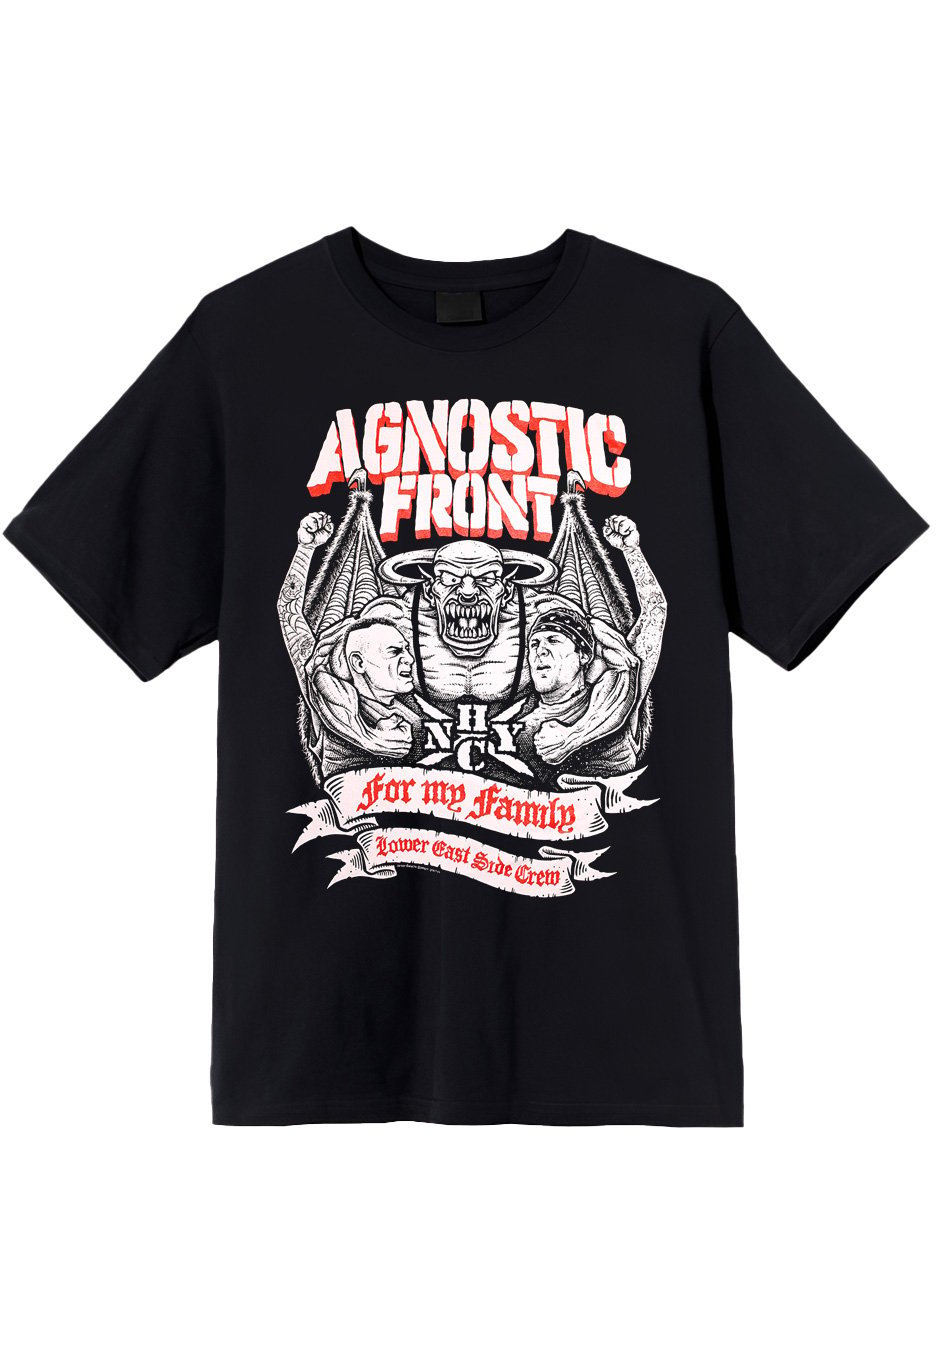 Agnostic Front - For My Family - T-Shirt